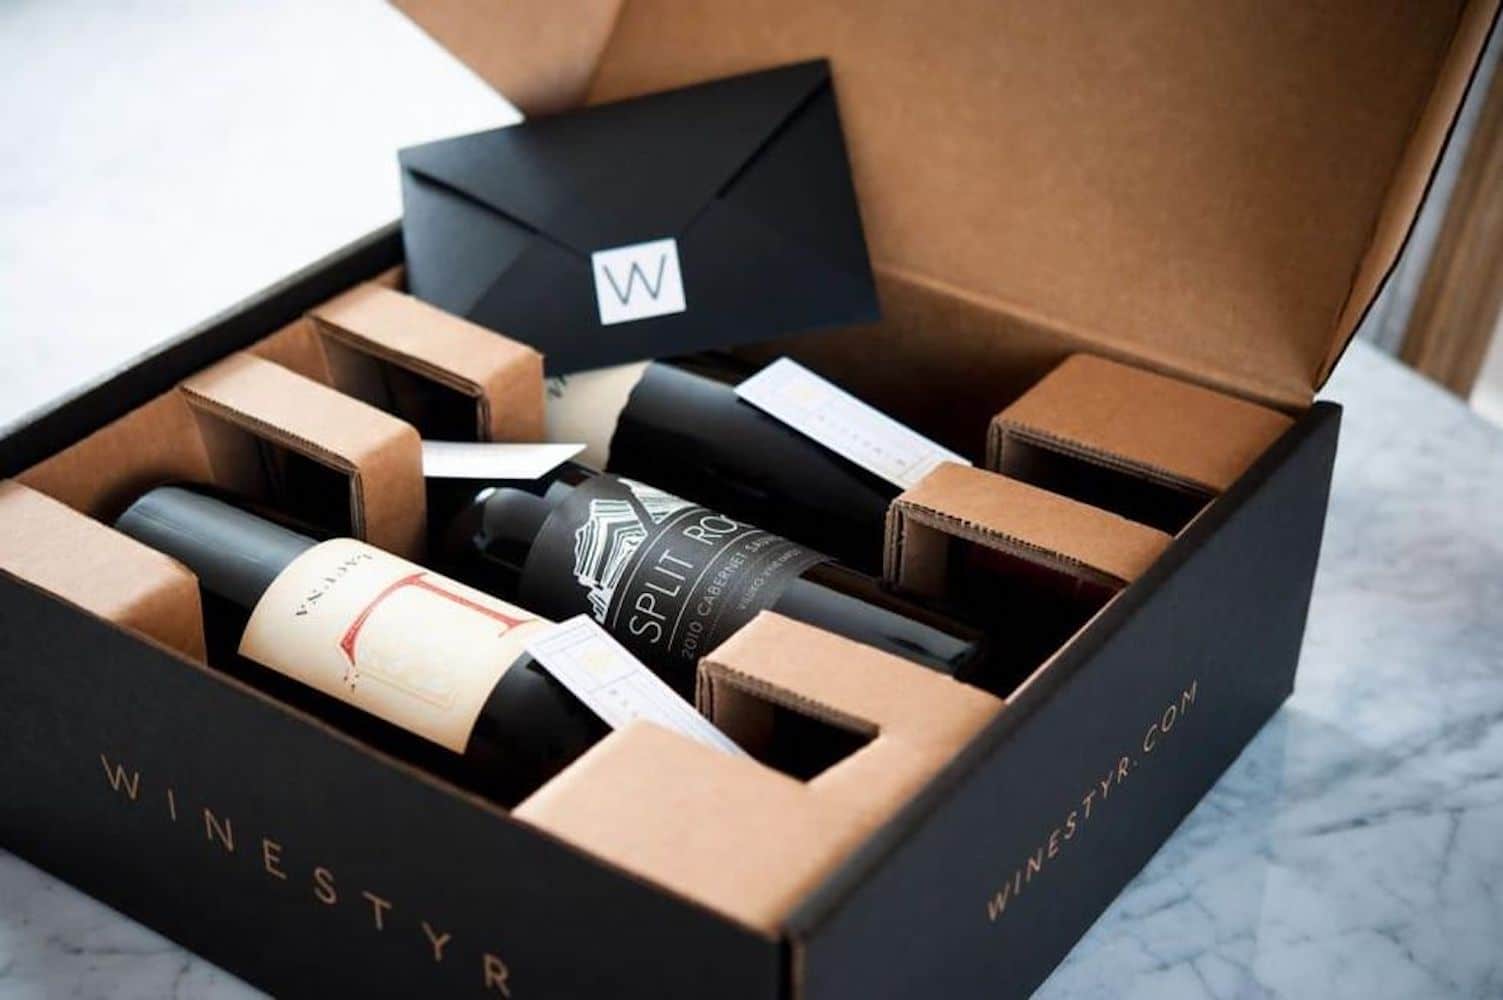 winestyr packaging design inspiration box inserts